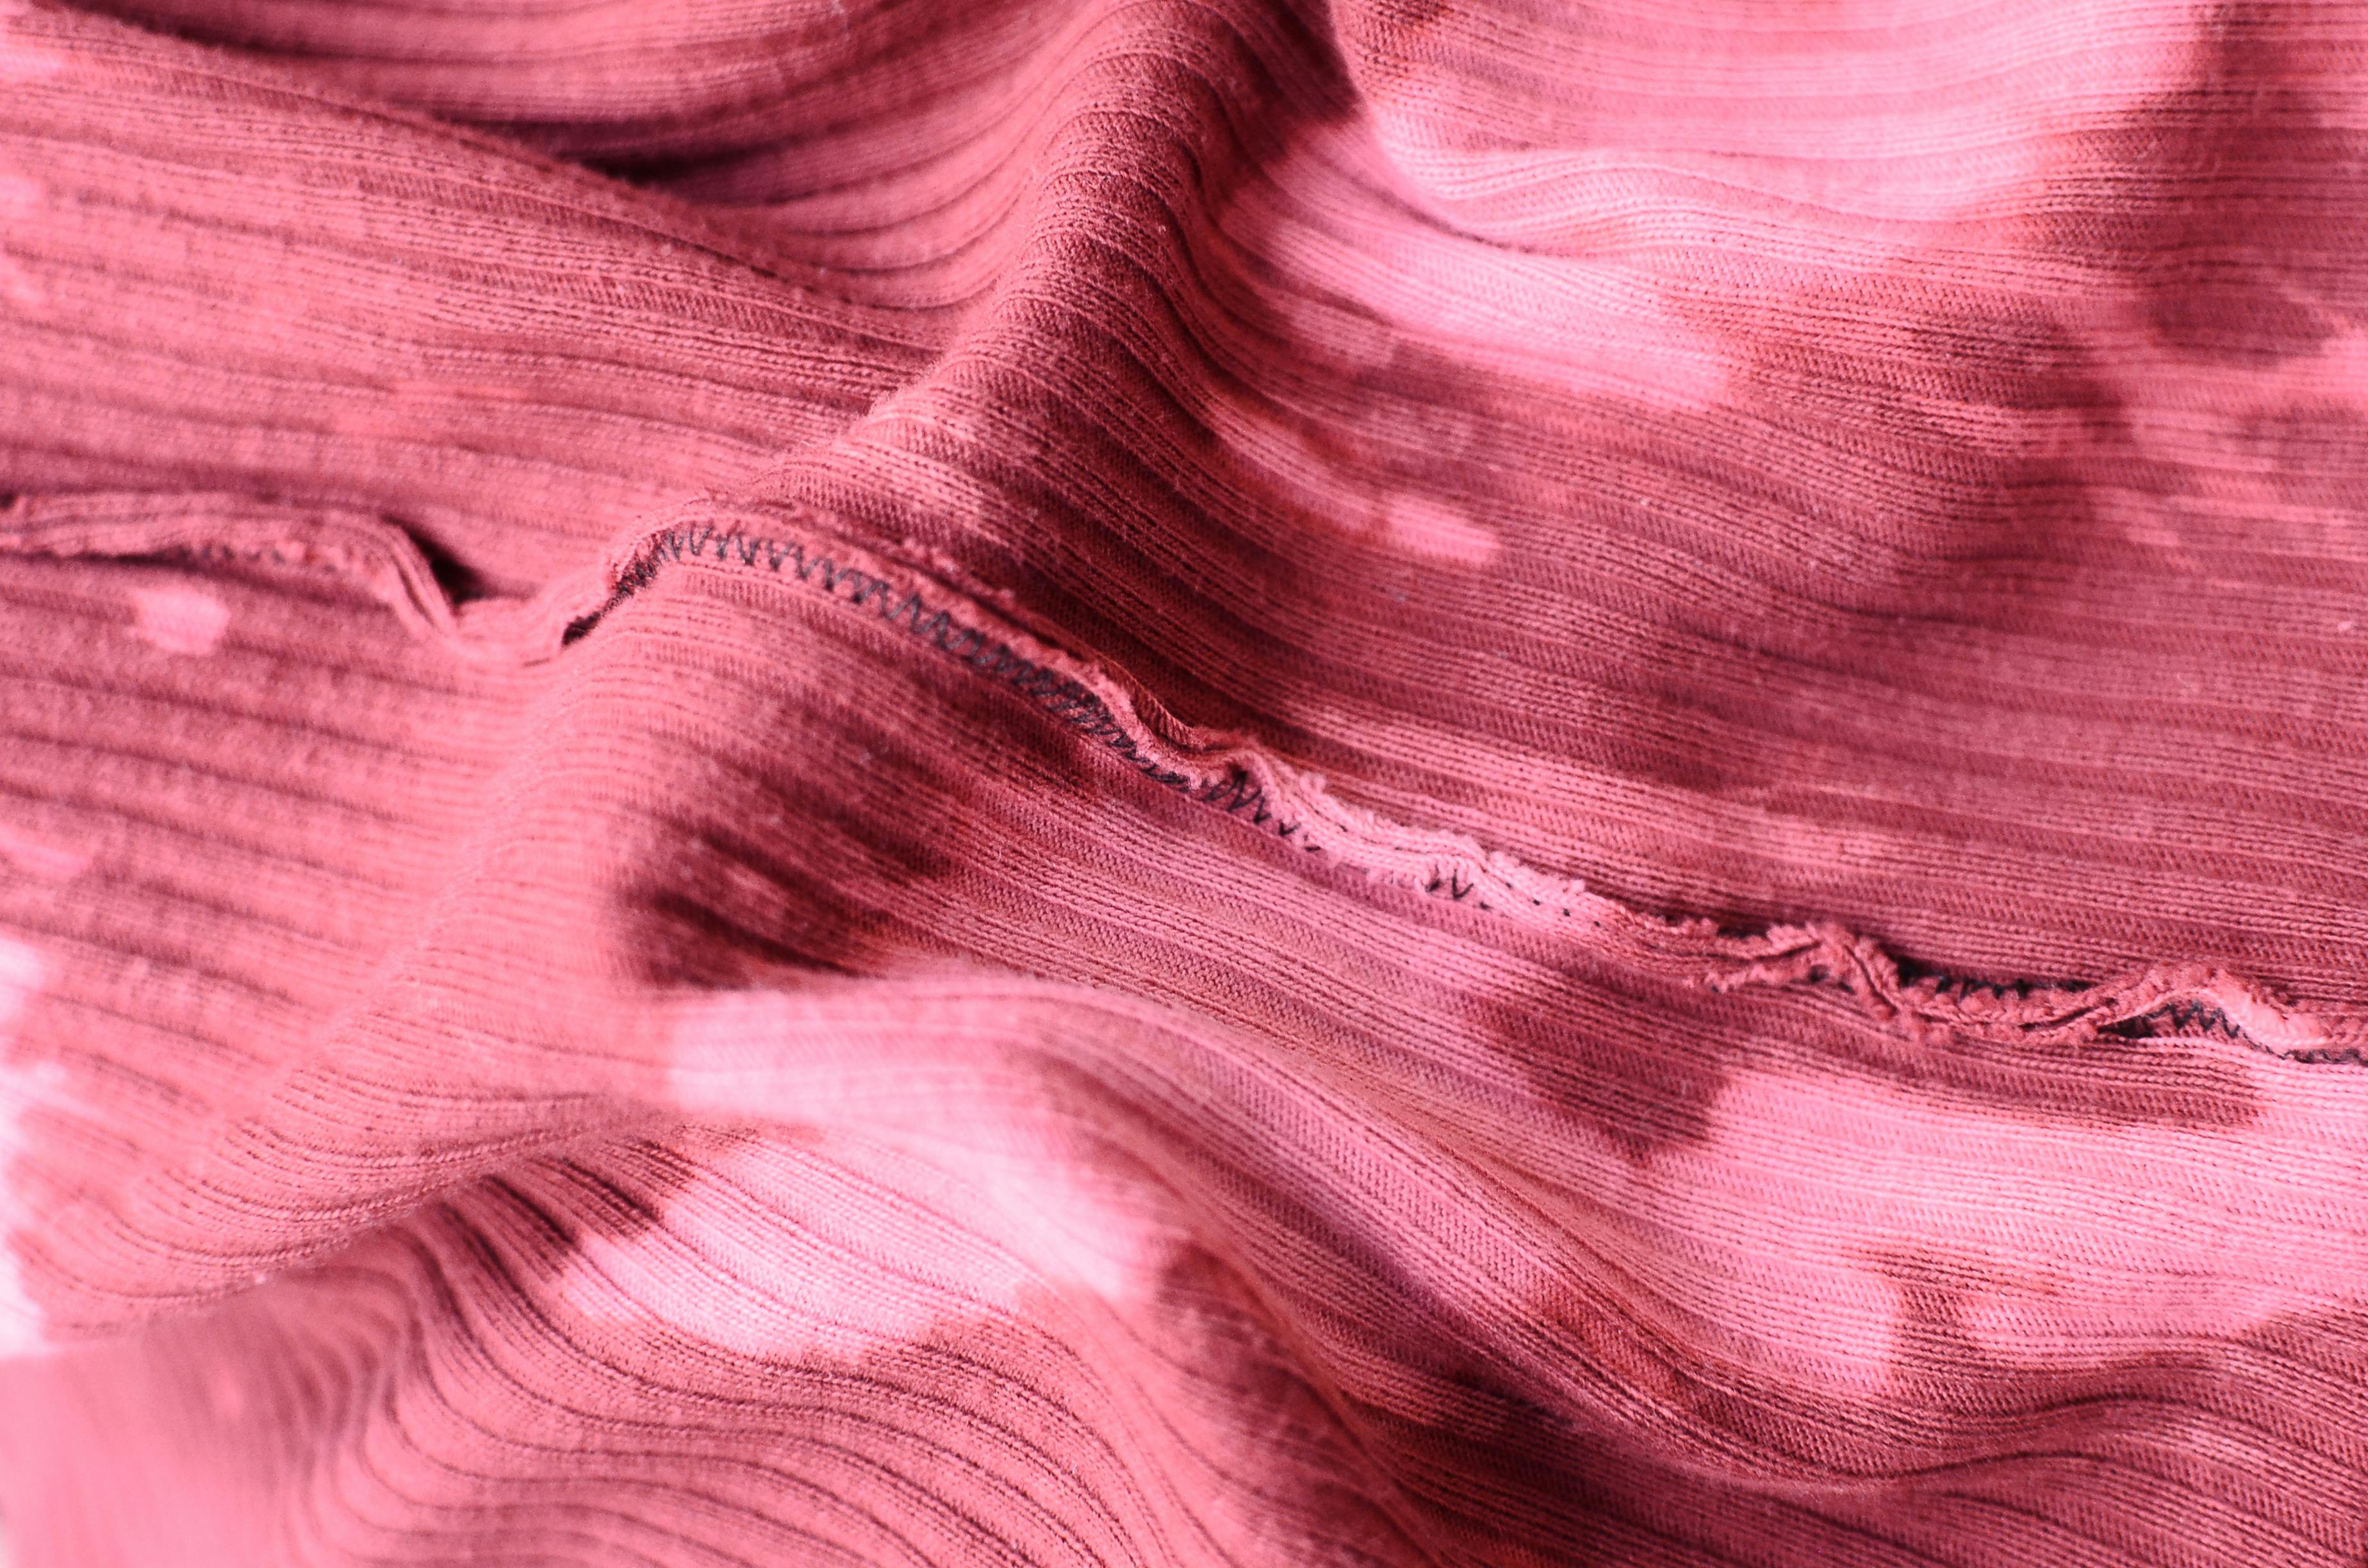 pink knitwear with inside seam on table